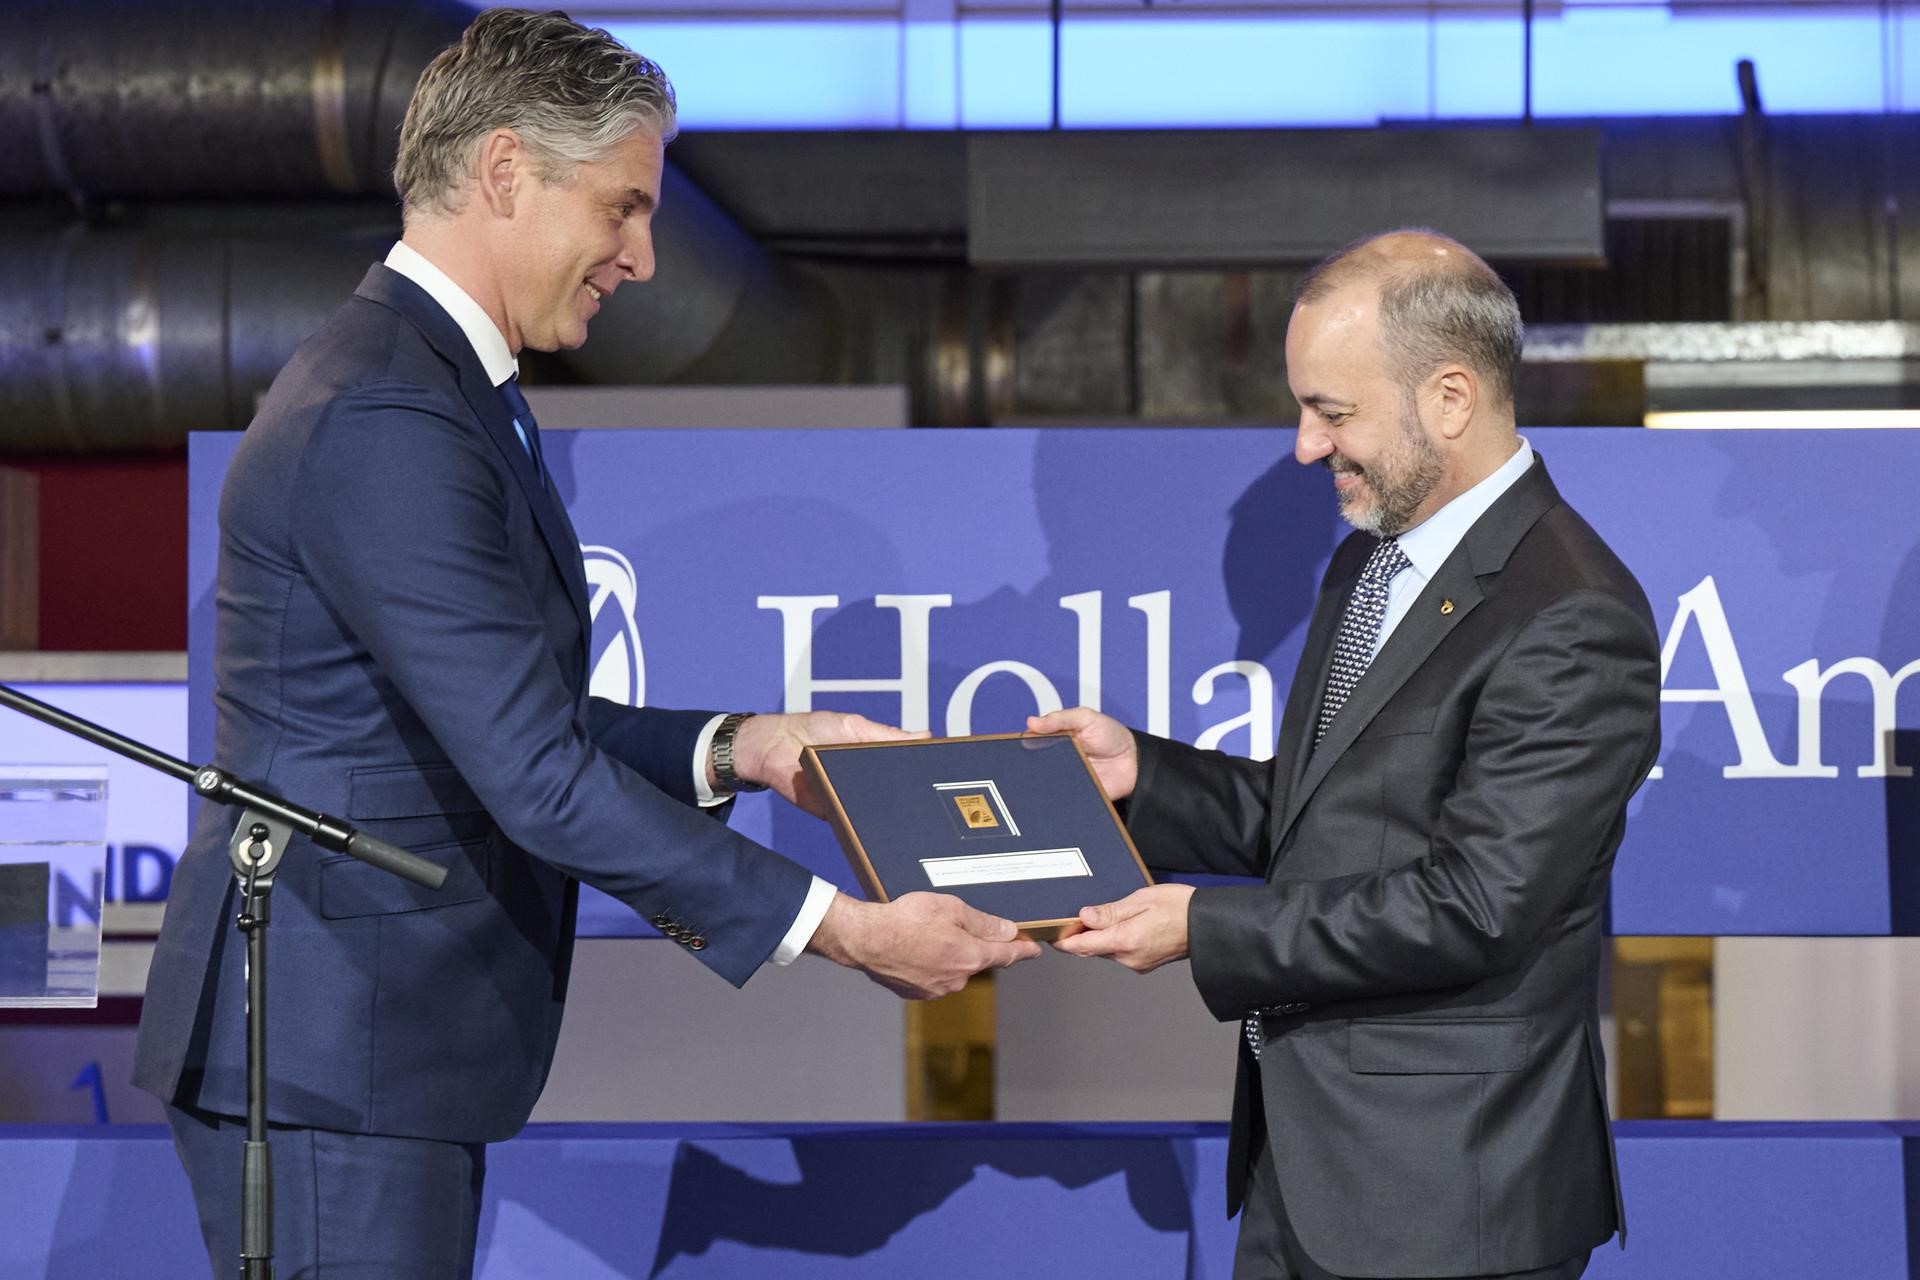 [pic] Holland America Line worked closely with PostNL to design a gold stamp in honour of the 150th anniversary. This stamp was handed over by Bob van Ierland, Managing Director PostNL Netherlands, to Gus Antorcha, President of Holland America` Line, during the ceremony (picture by Rebekah Mell).